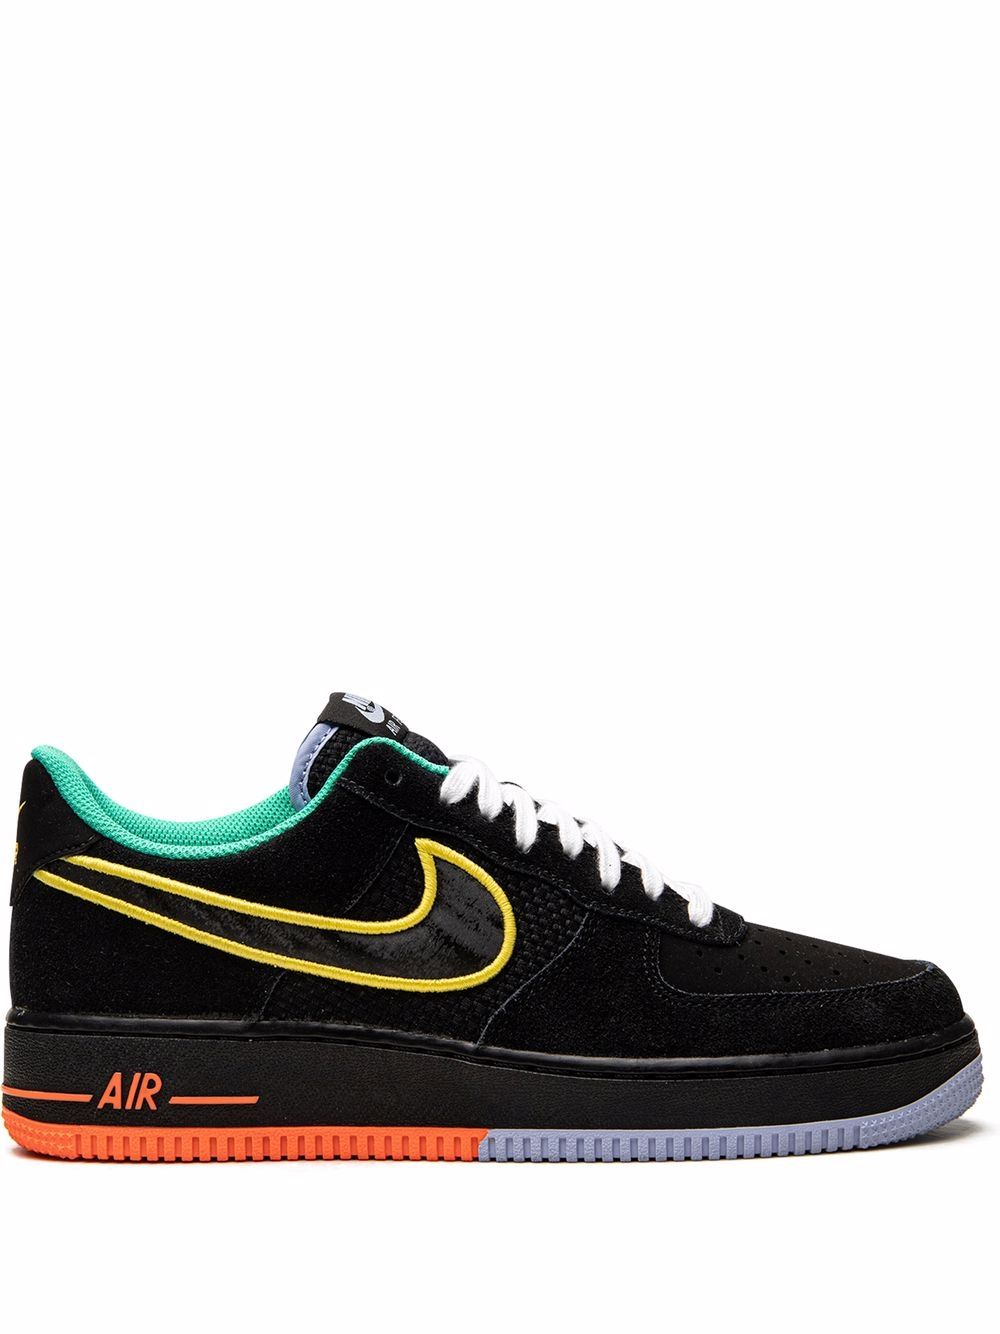 Nike Air Force 1 Low '07 LV8 "Peace And Unity" sneakers - Black von Nike